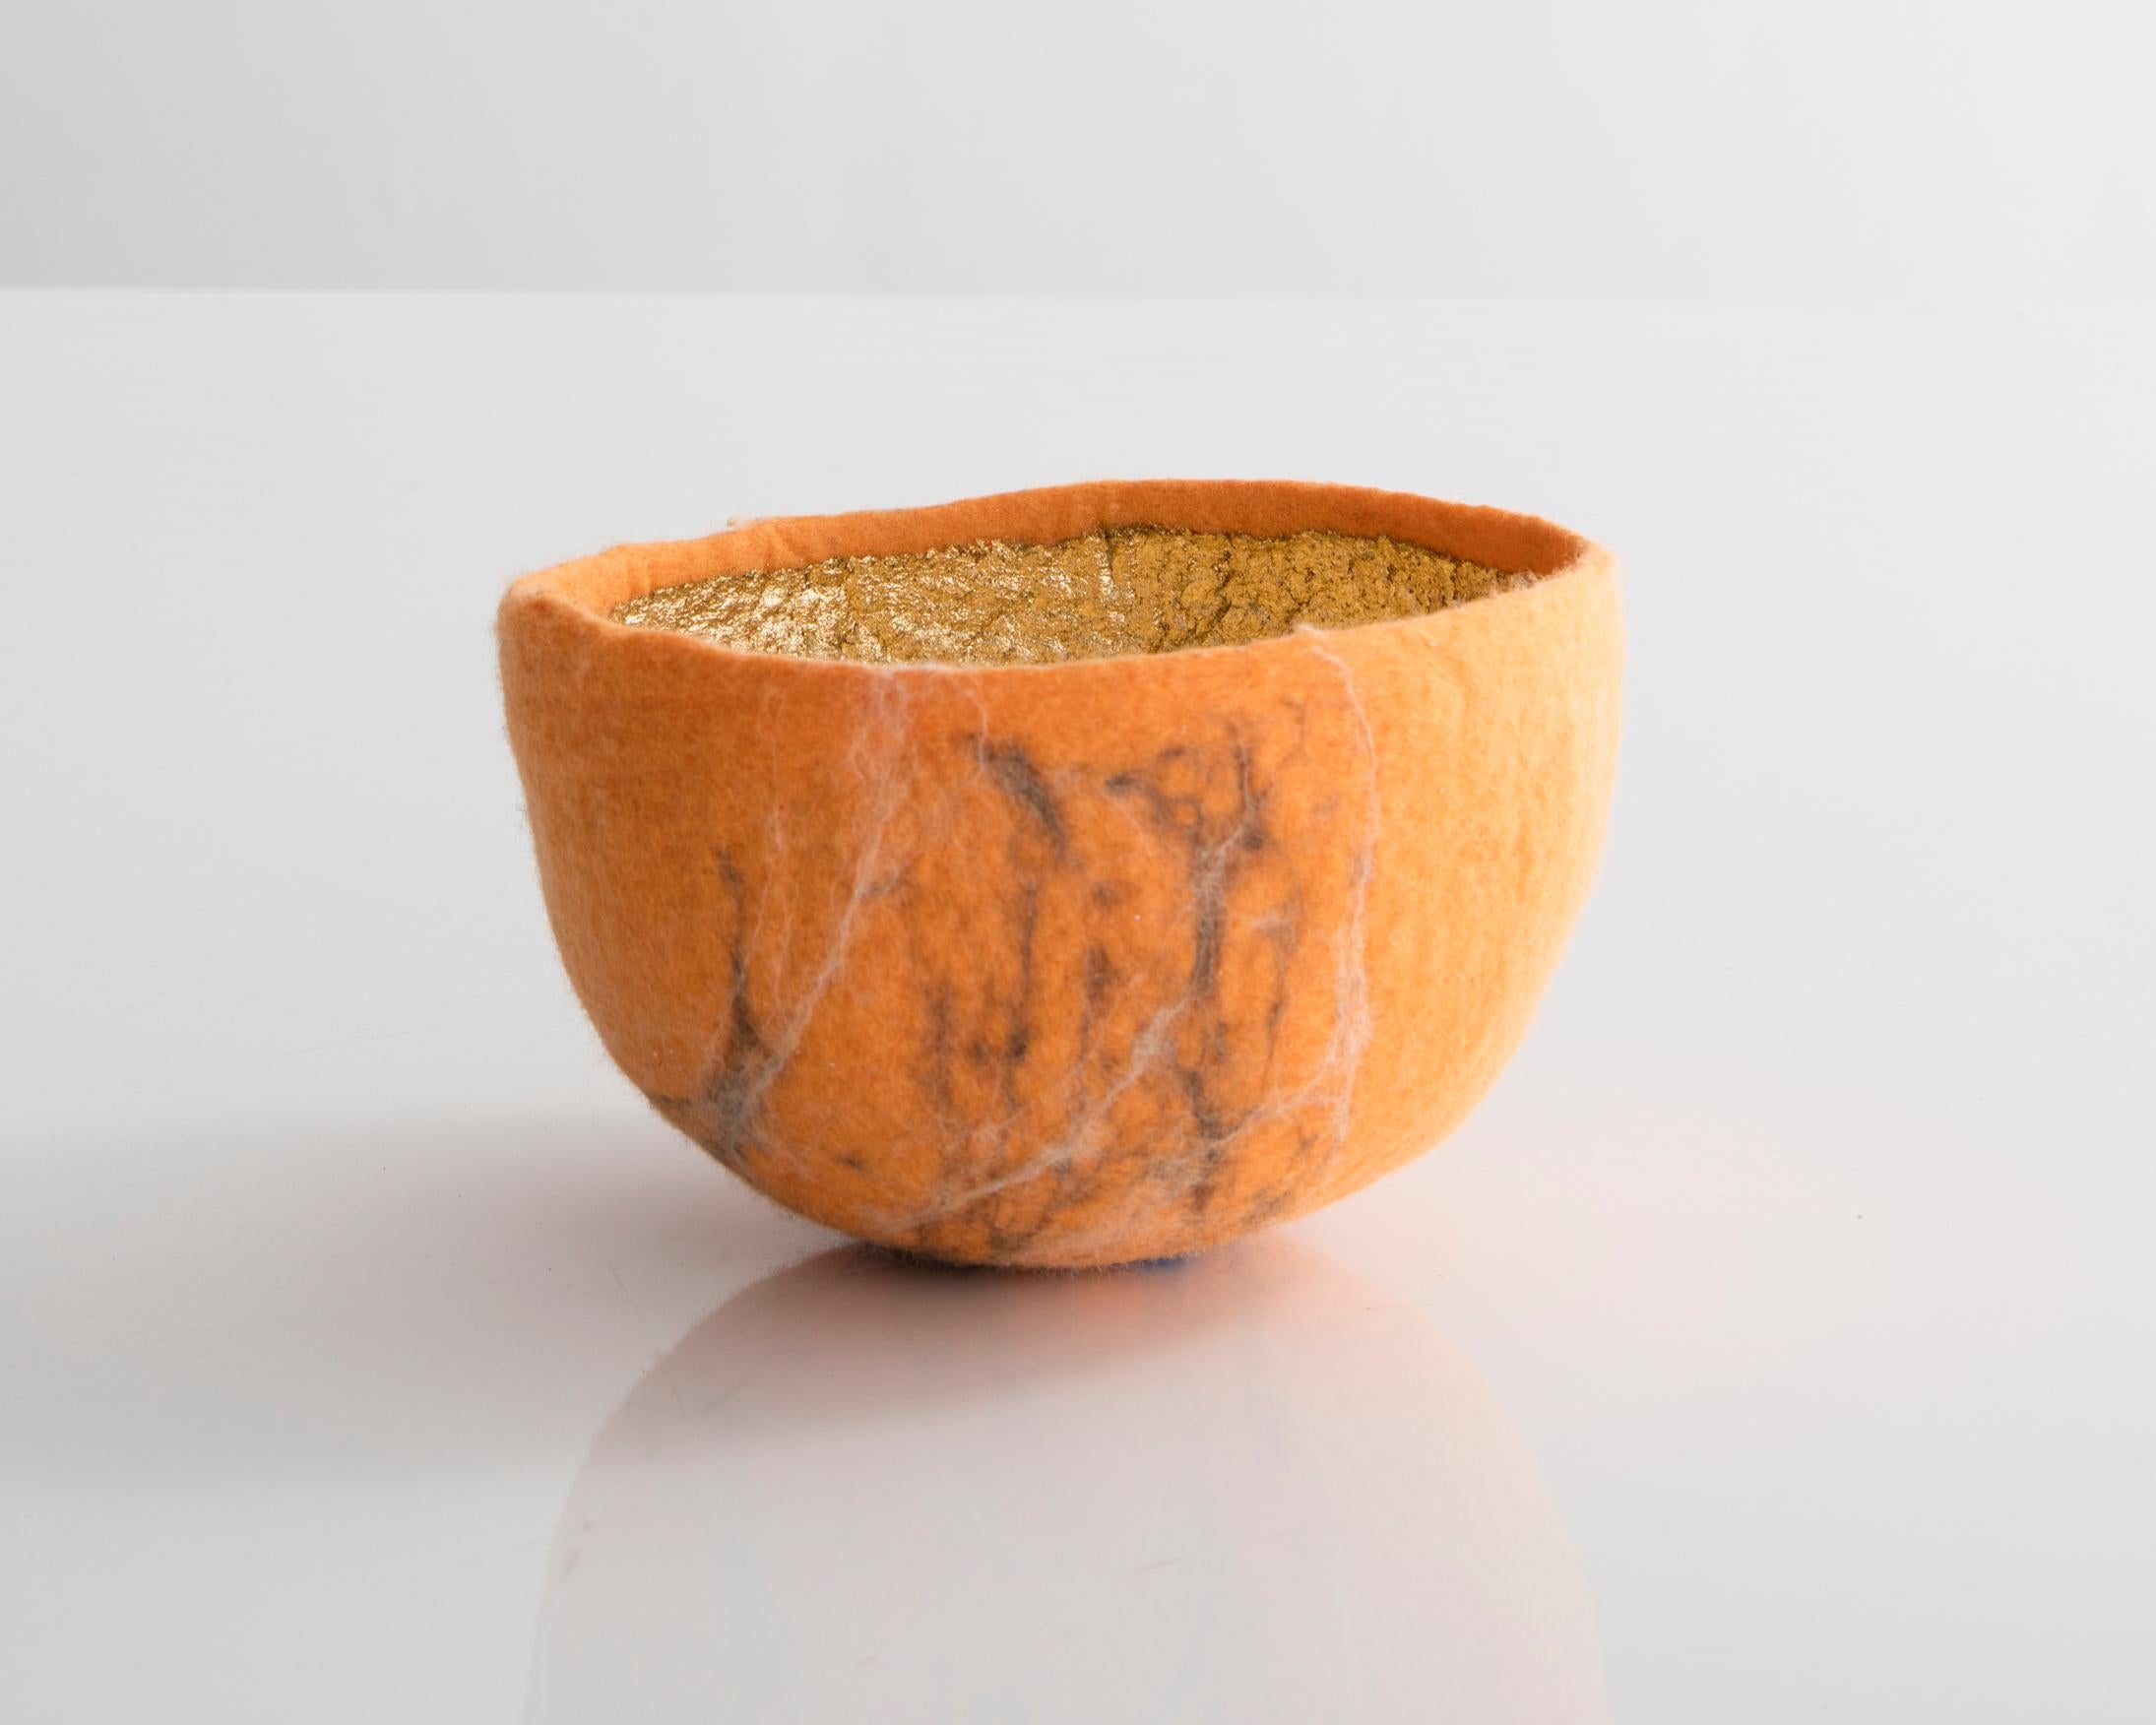 Sculptural bowl in orange and gold metallic felt. Designed and made by Ronel Jordaan, South Africa, 2016.